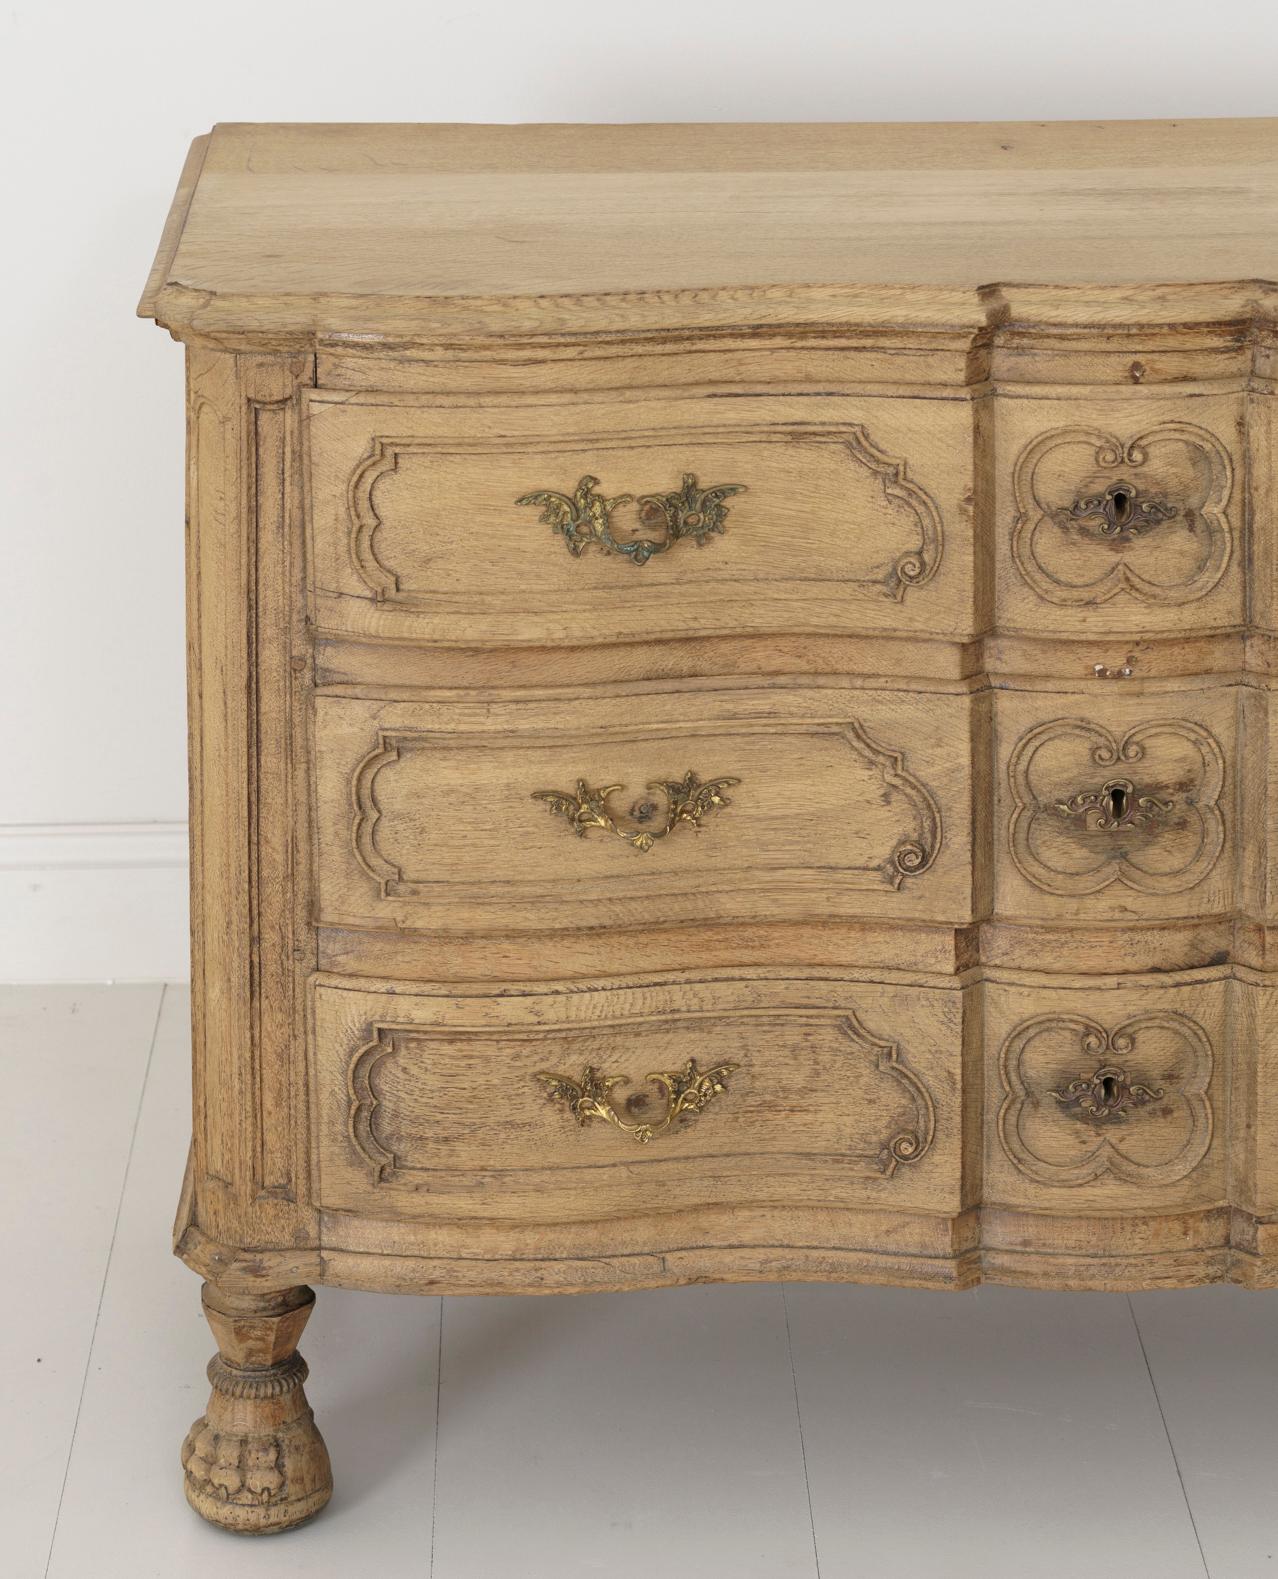 A richly carved Louis XVI period bleached oak commode with an Arbalette shaped front and paw feet. Original brass hardware. From Liege, Belgium, circa 1780.